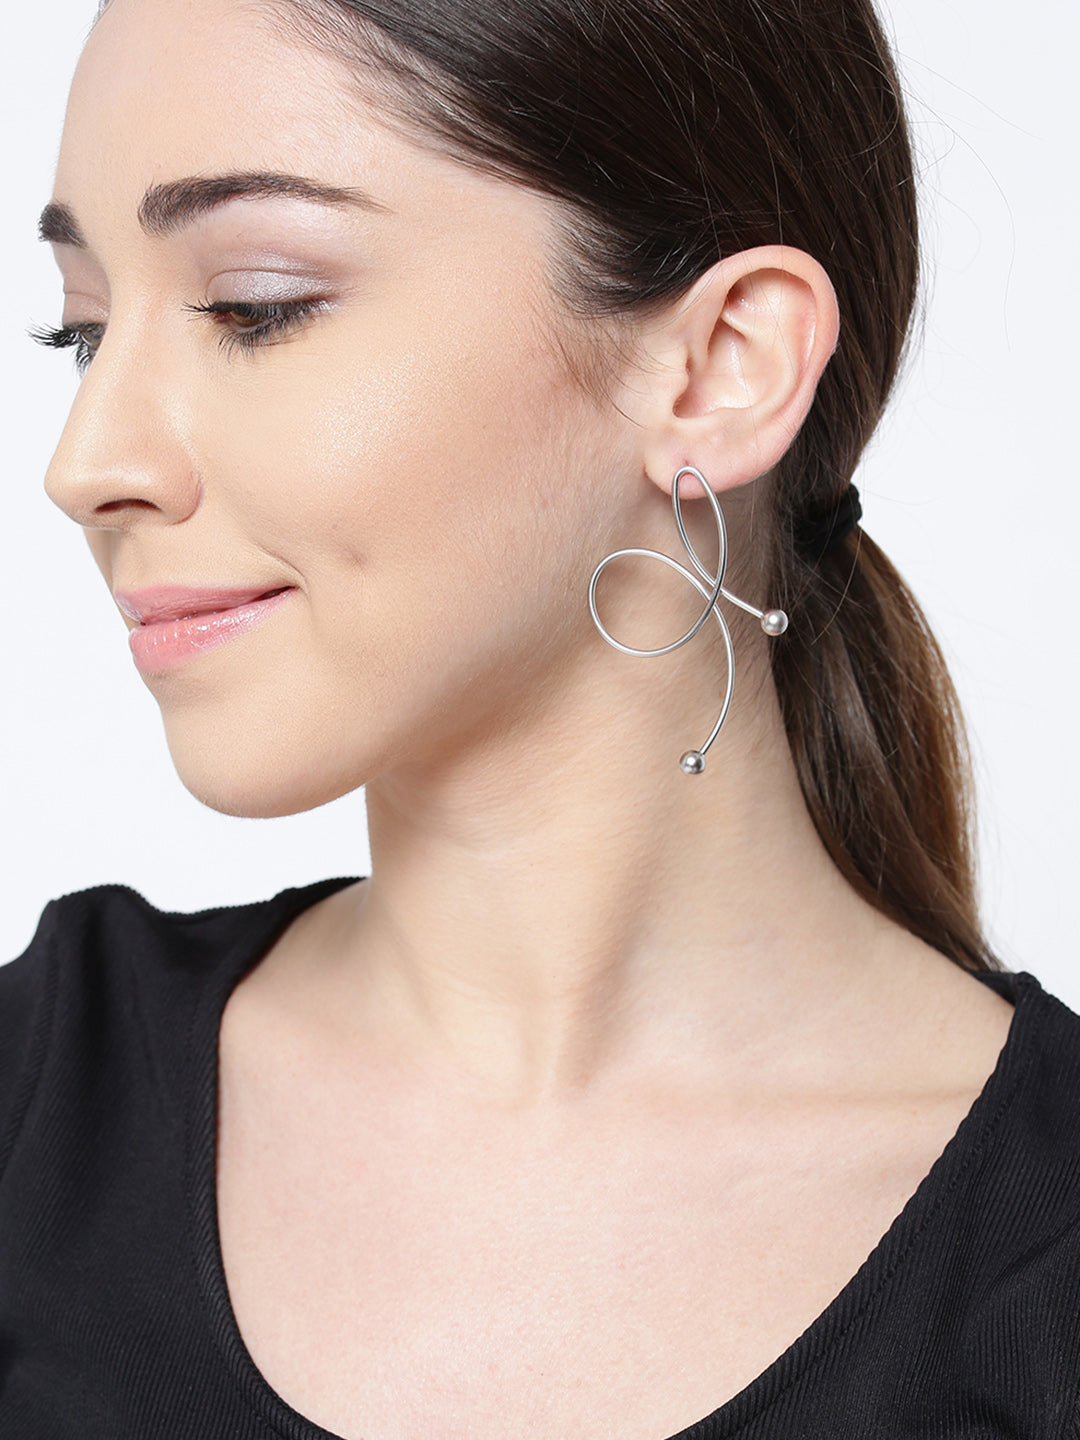 Statement Jewelry Earrings With Sterling Silver Pin @ Back For Girls/Women